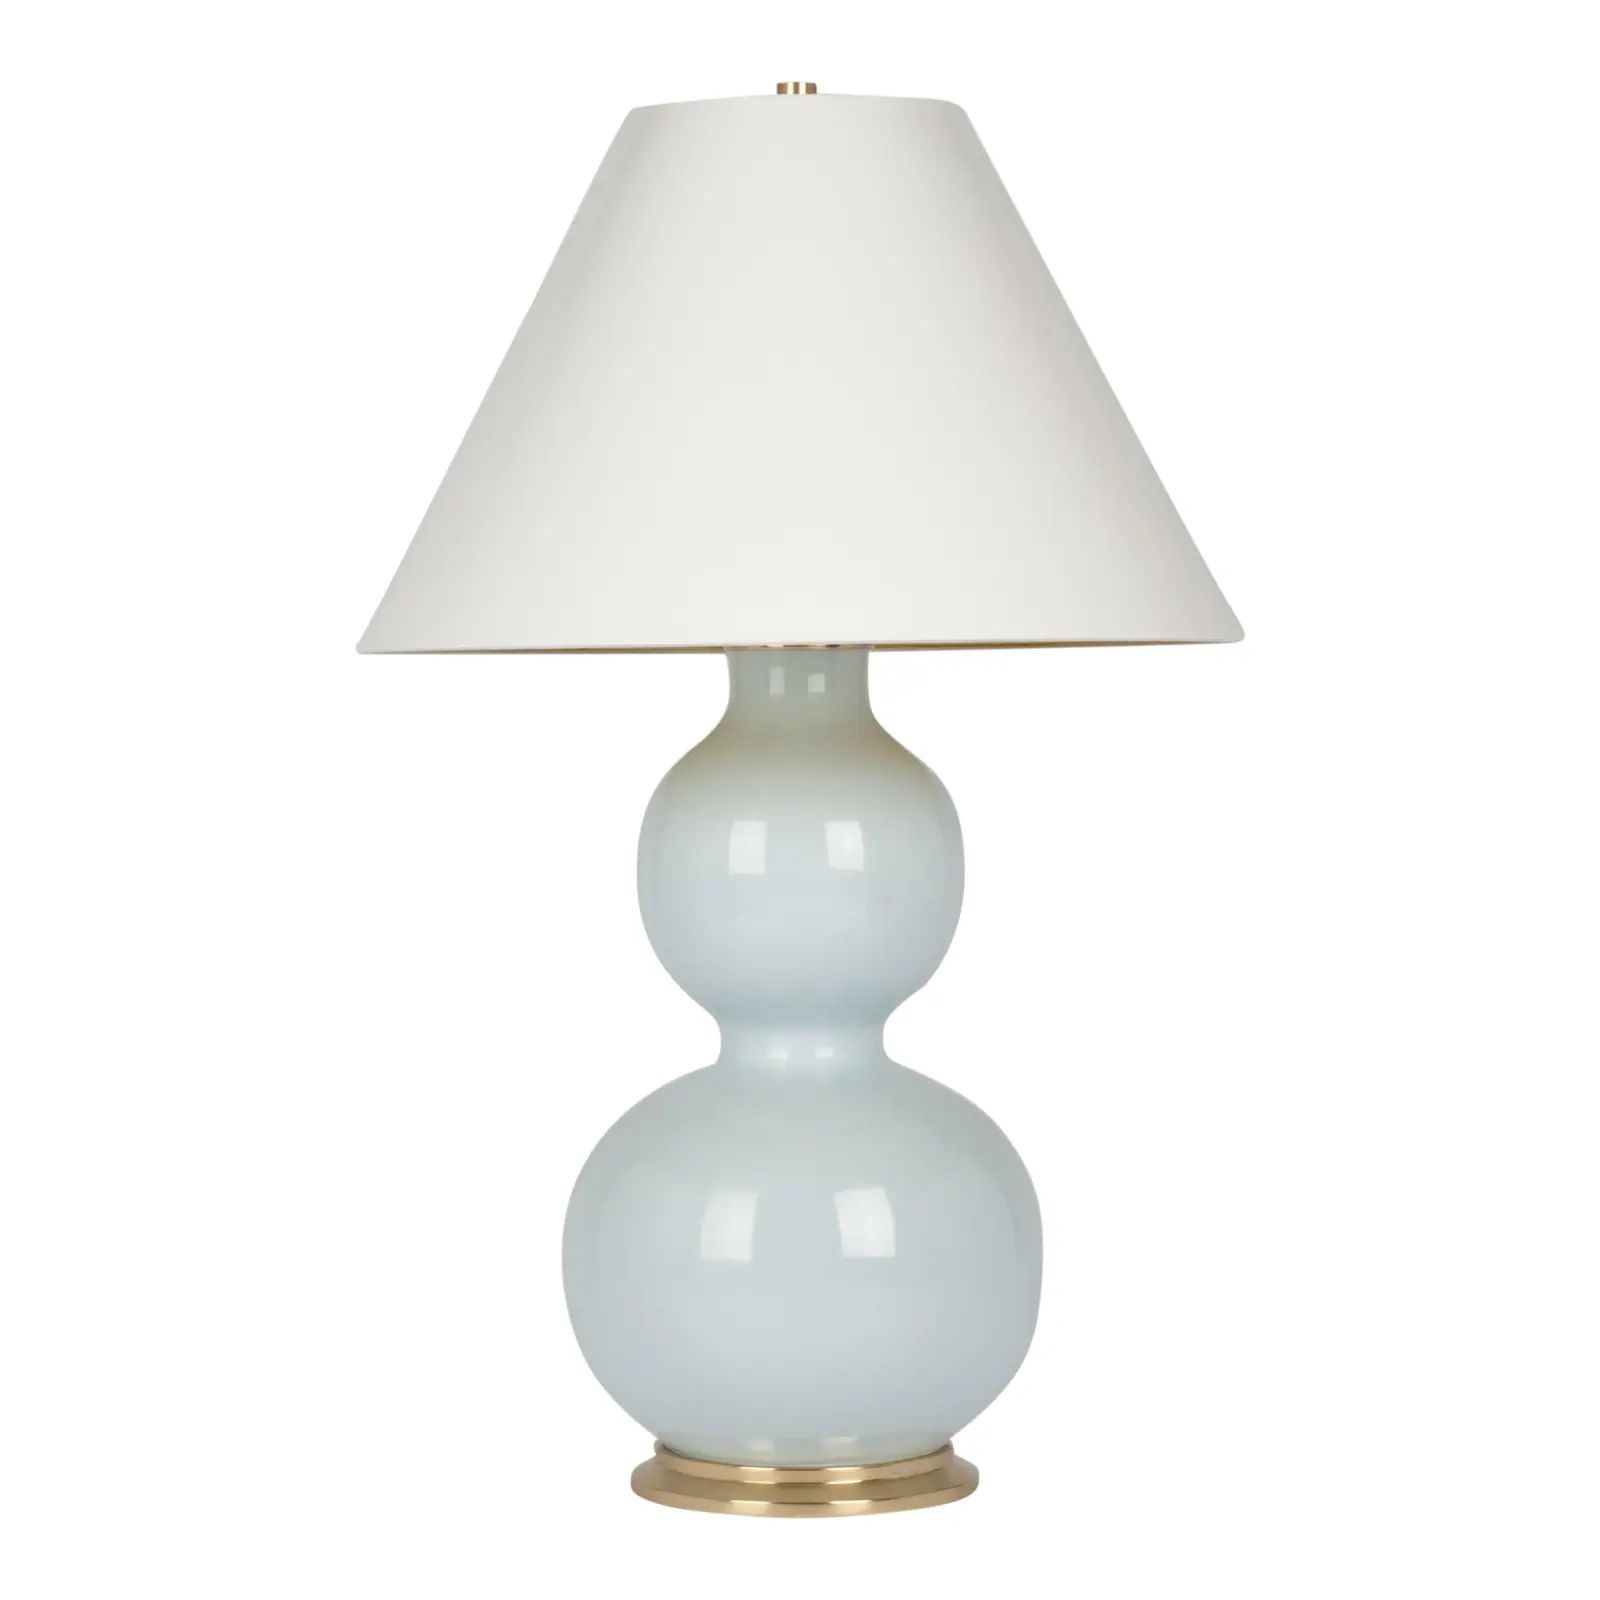 Natalie Lamp in Powder Blue / Polished Brass - Christopher Spitzmiller for The Lacquer Company | Chairish